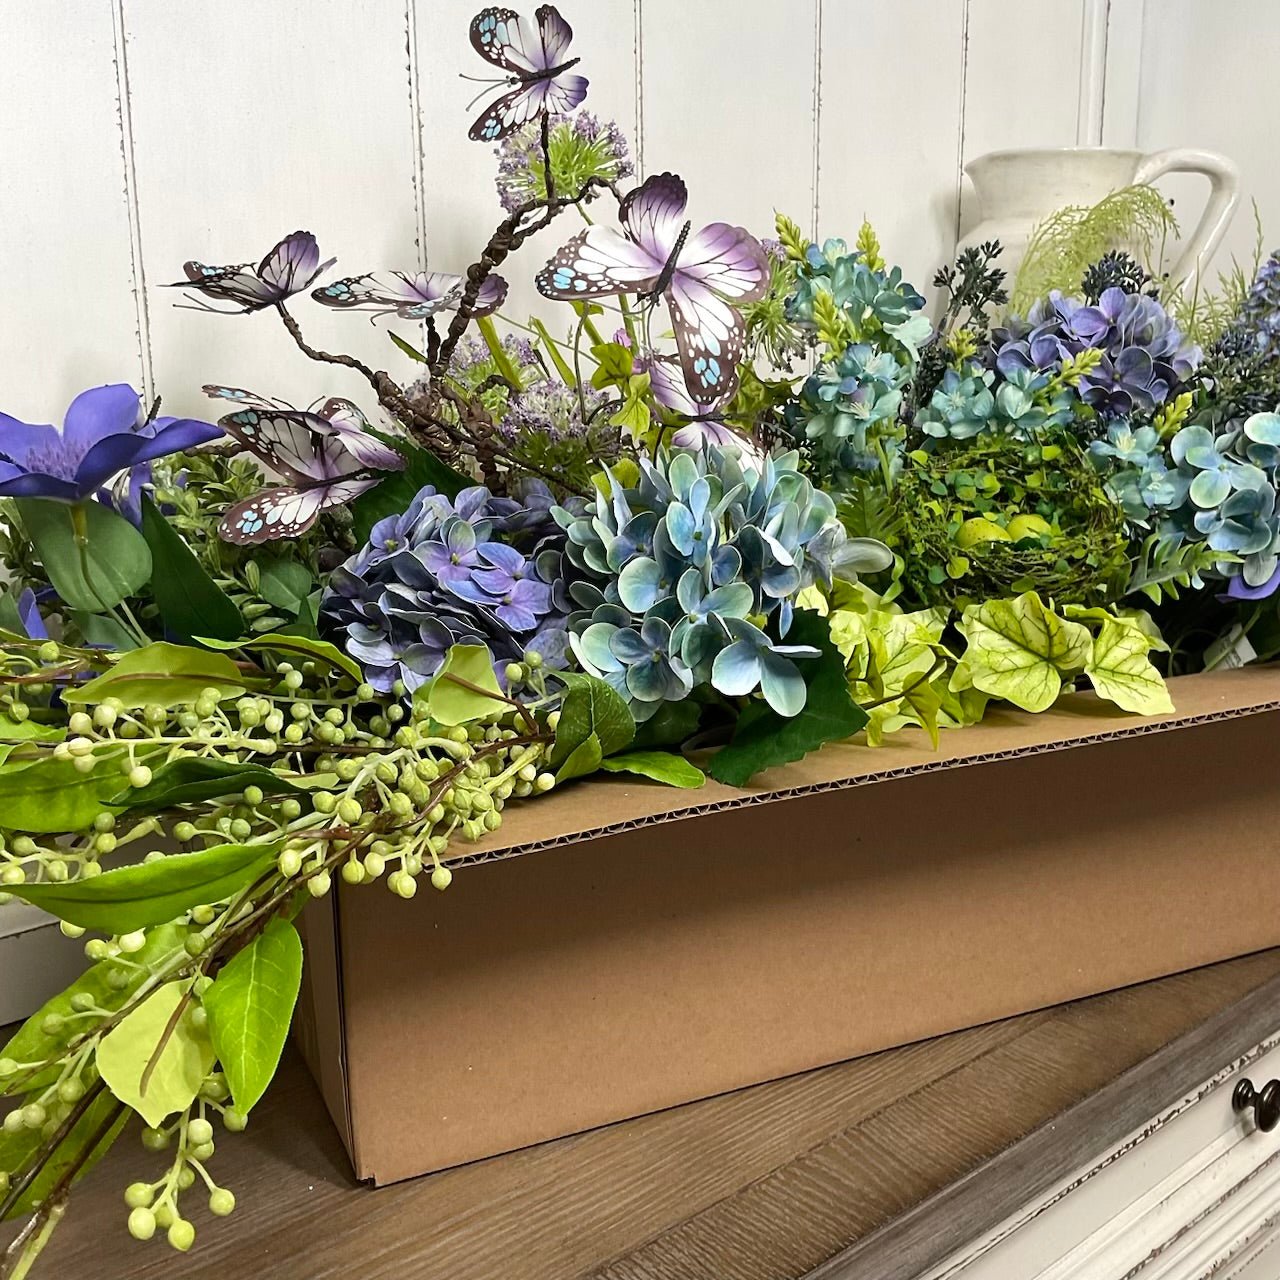 Save some green - Coordinated clematis promo box - Greenery MarketWITHButterfly/Bluegreenbox